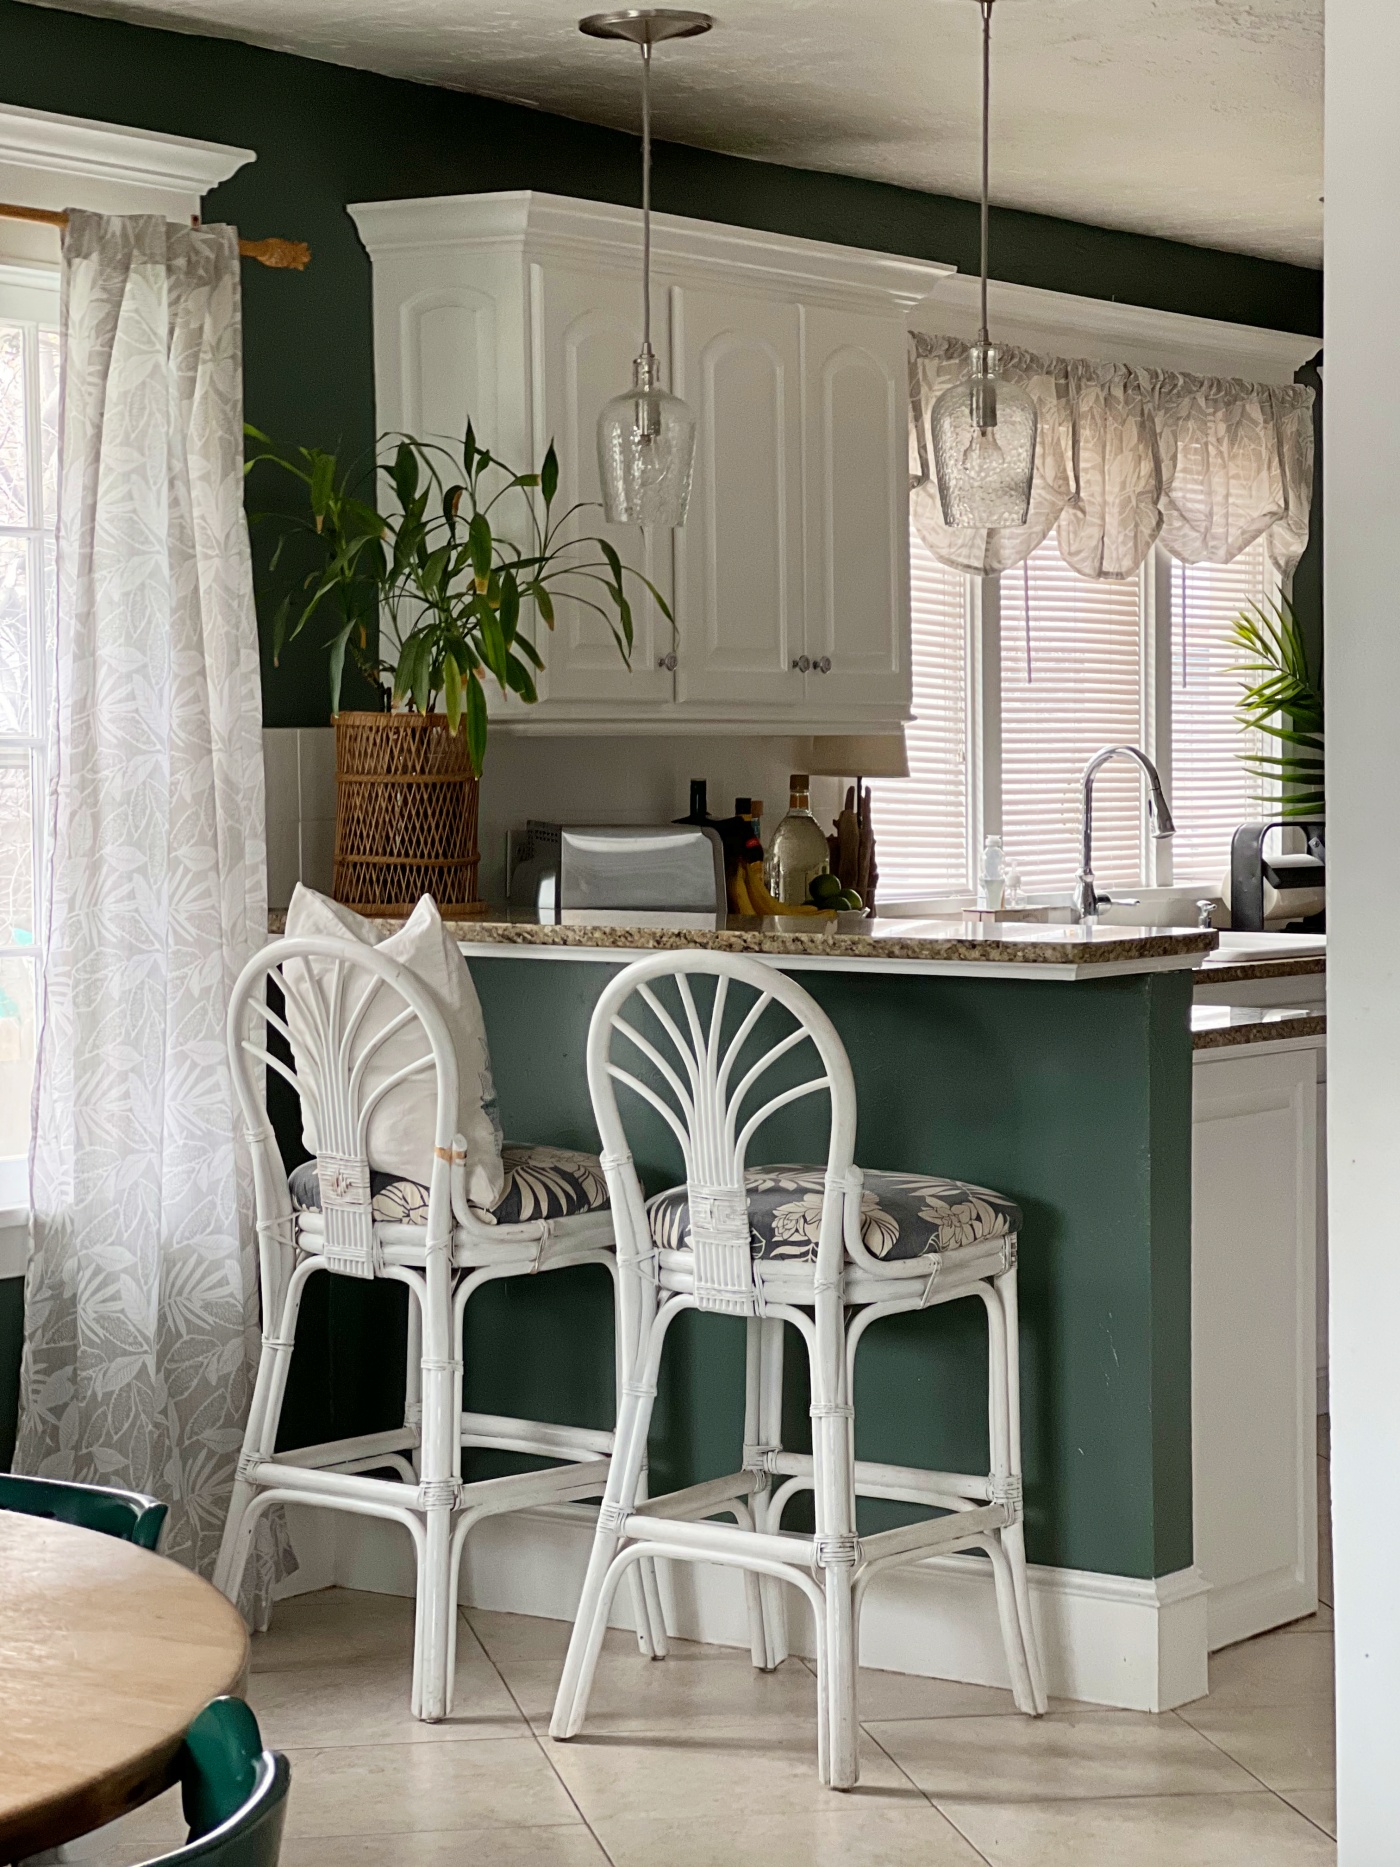 Tropical Cottage Kitchen Reveal and New Kitchen Curtains